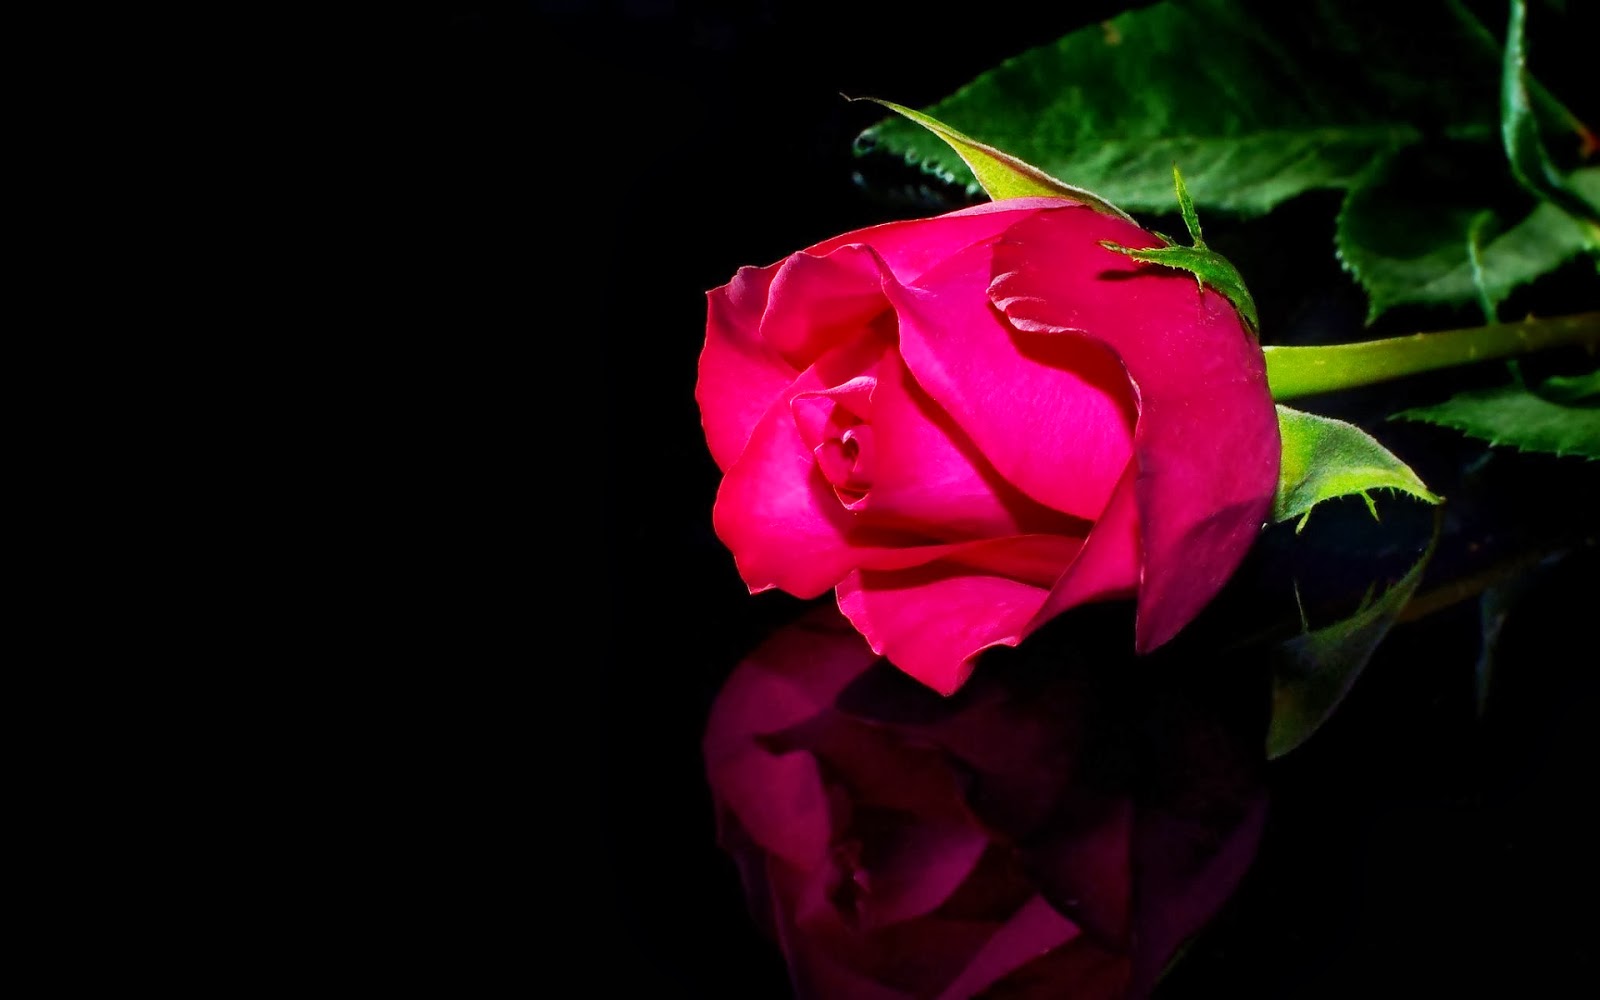 Red Rose Black background Template stock images free downloadjpg